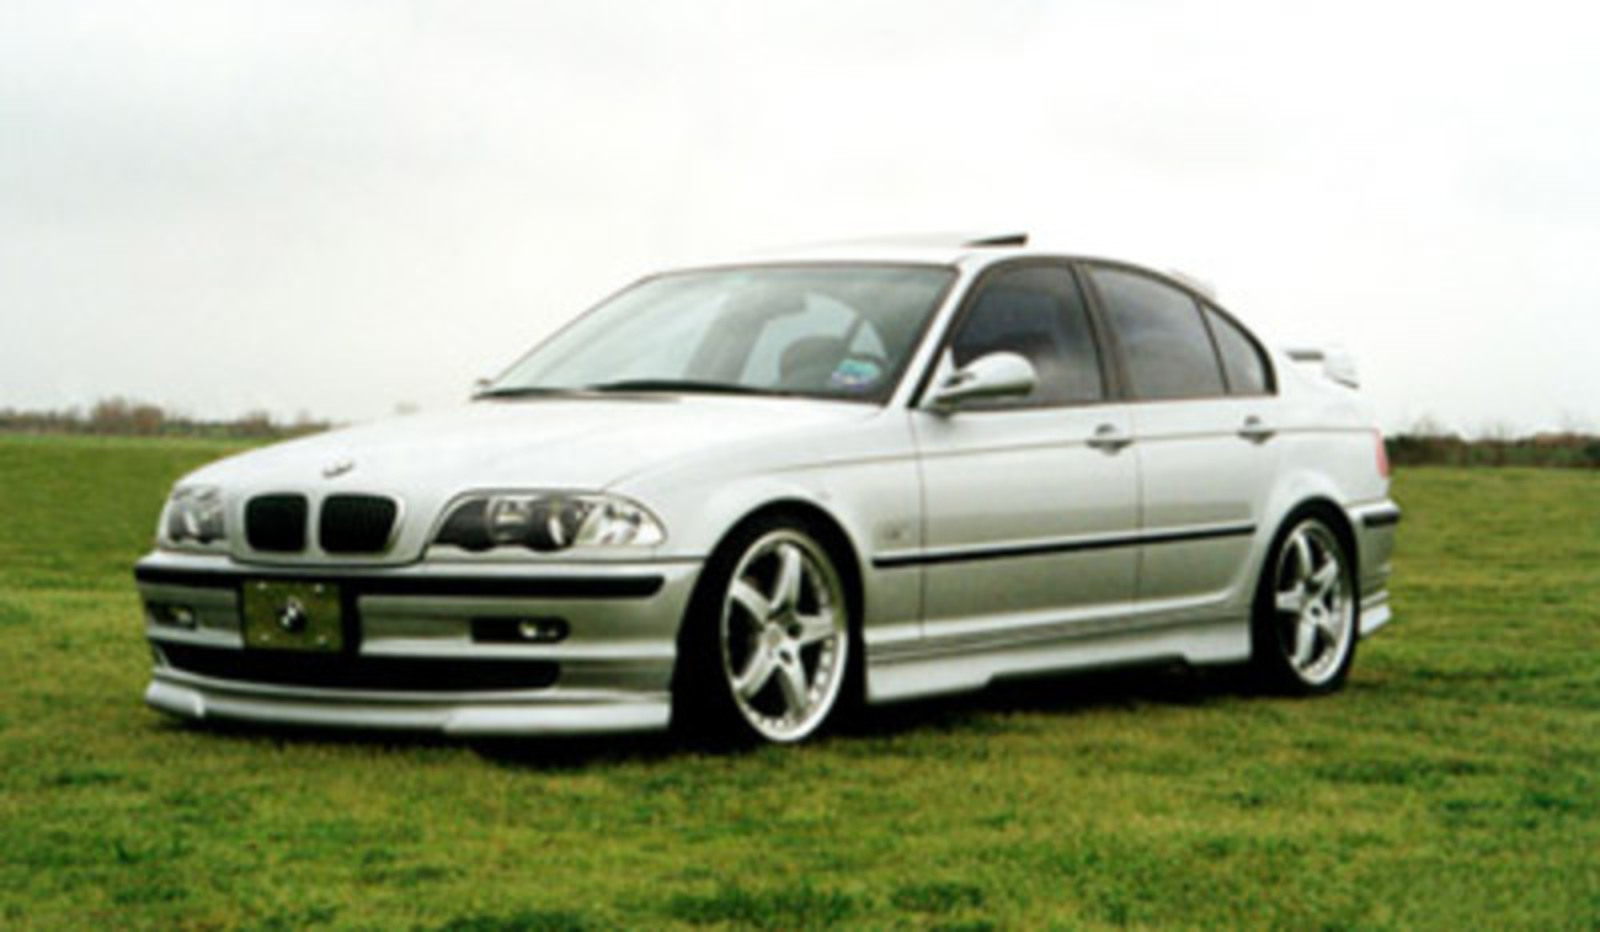 BMW 323i. View Download Wallpaper. 400x233. Comments